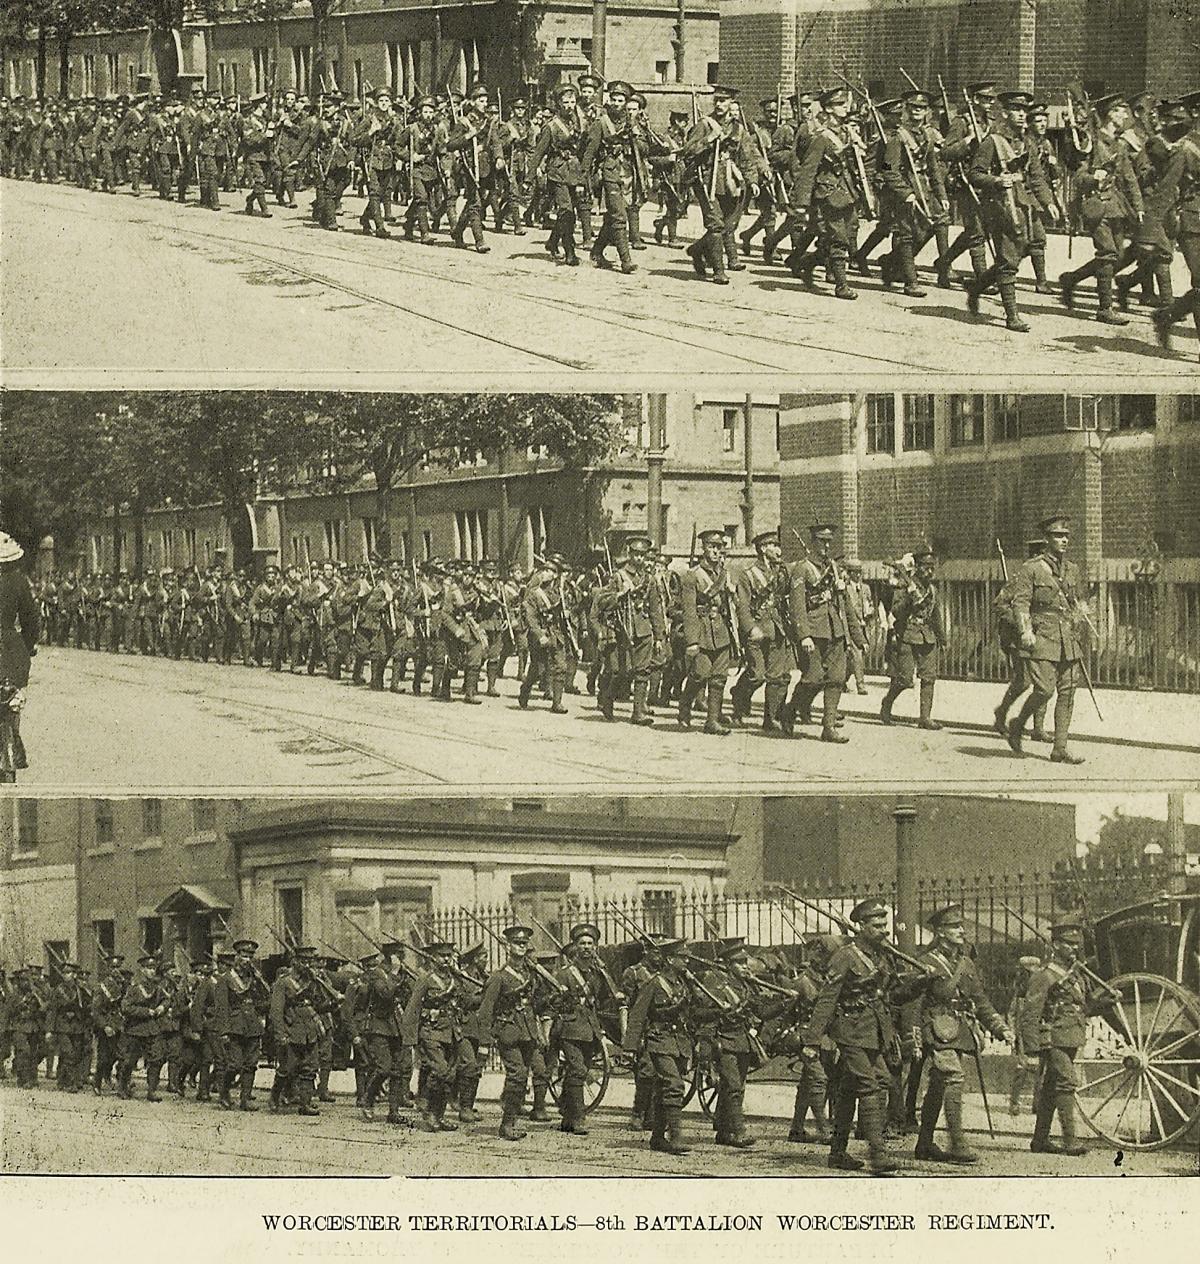 Worcester Territorials - Worcestershire Regiment's 8th Battalion, marching through the city. Picture from the Berrows Journal, courtesy of 'Worcestershire Archives and Archaeology Services'.